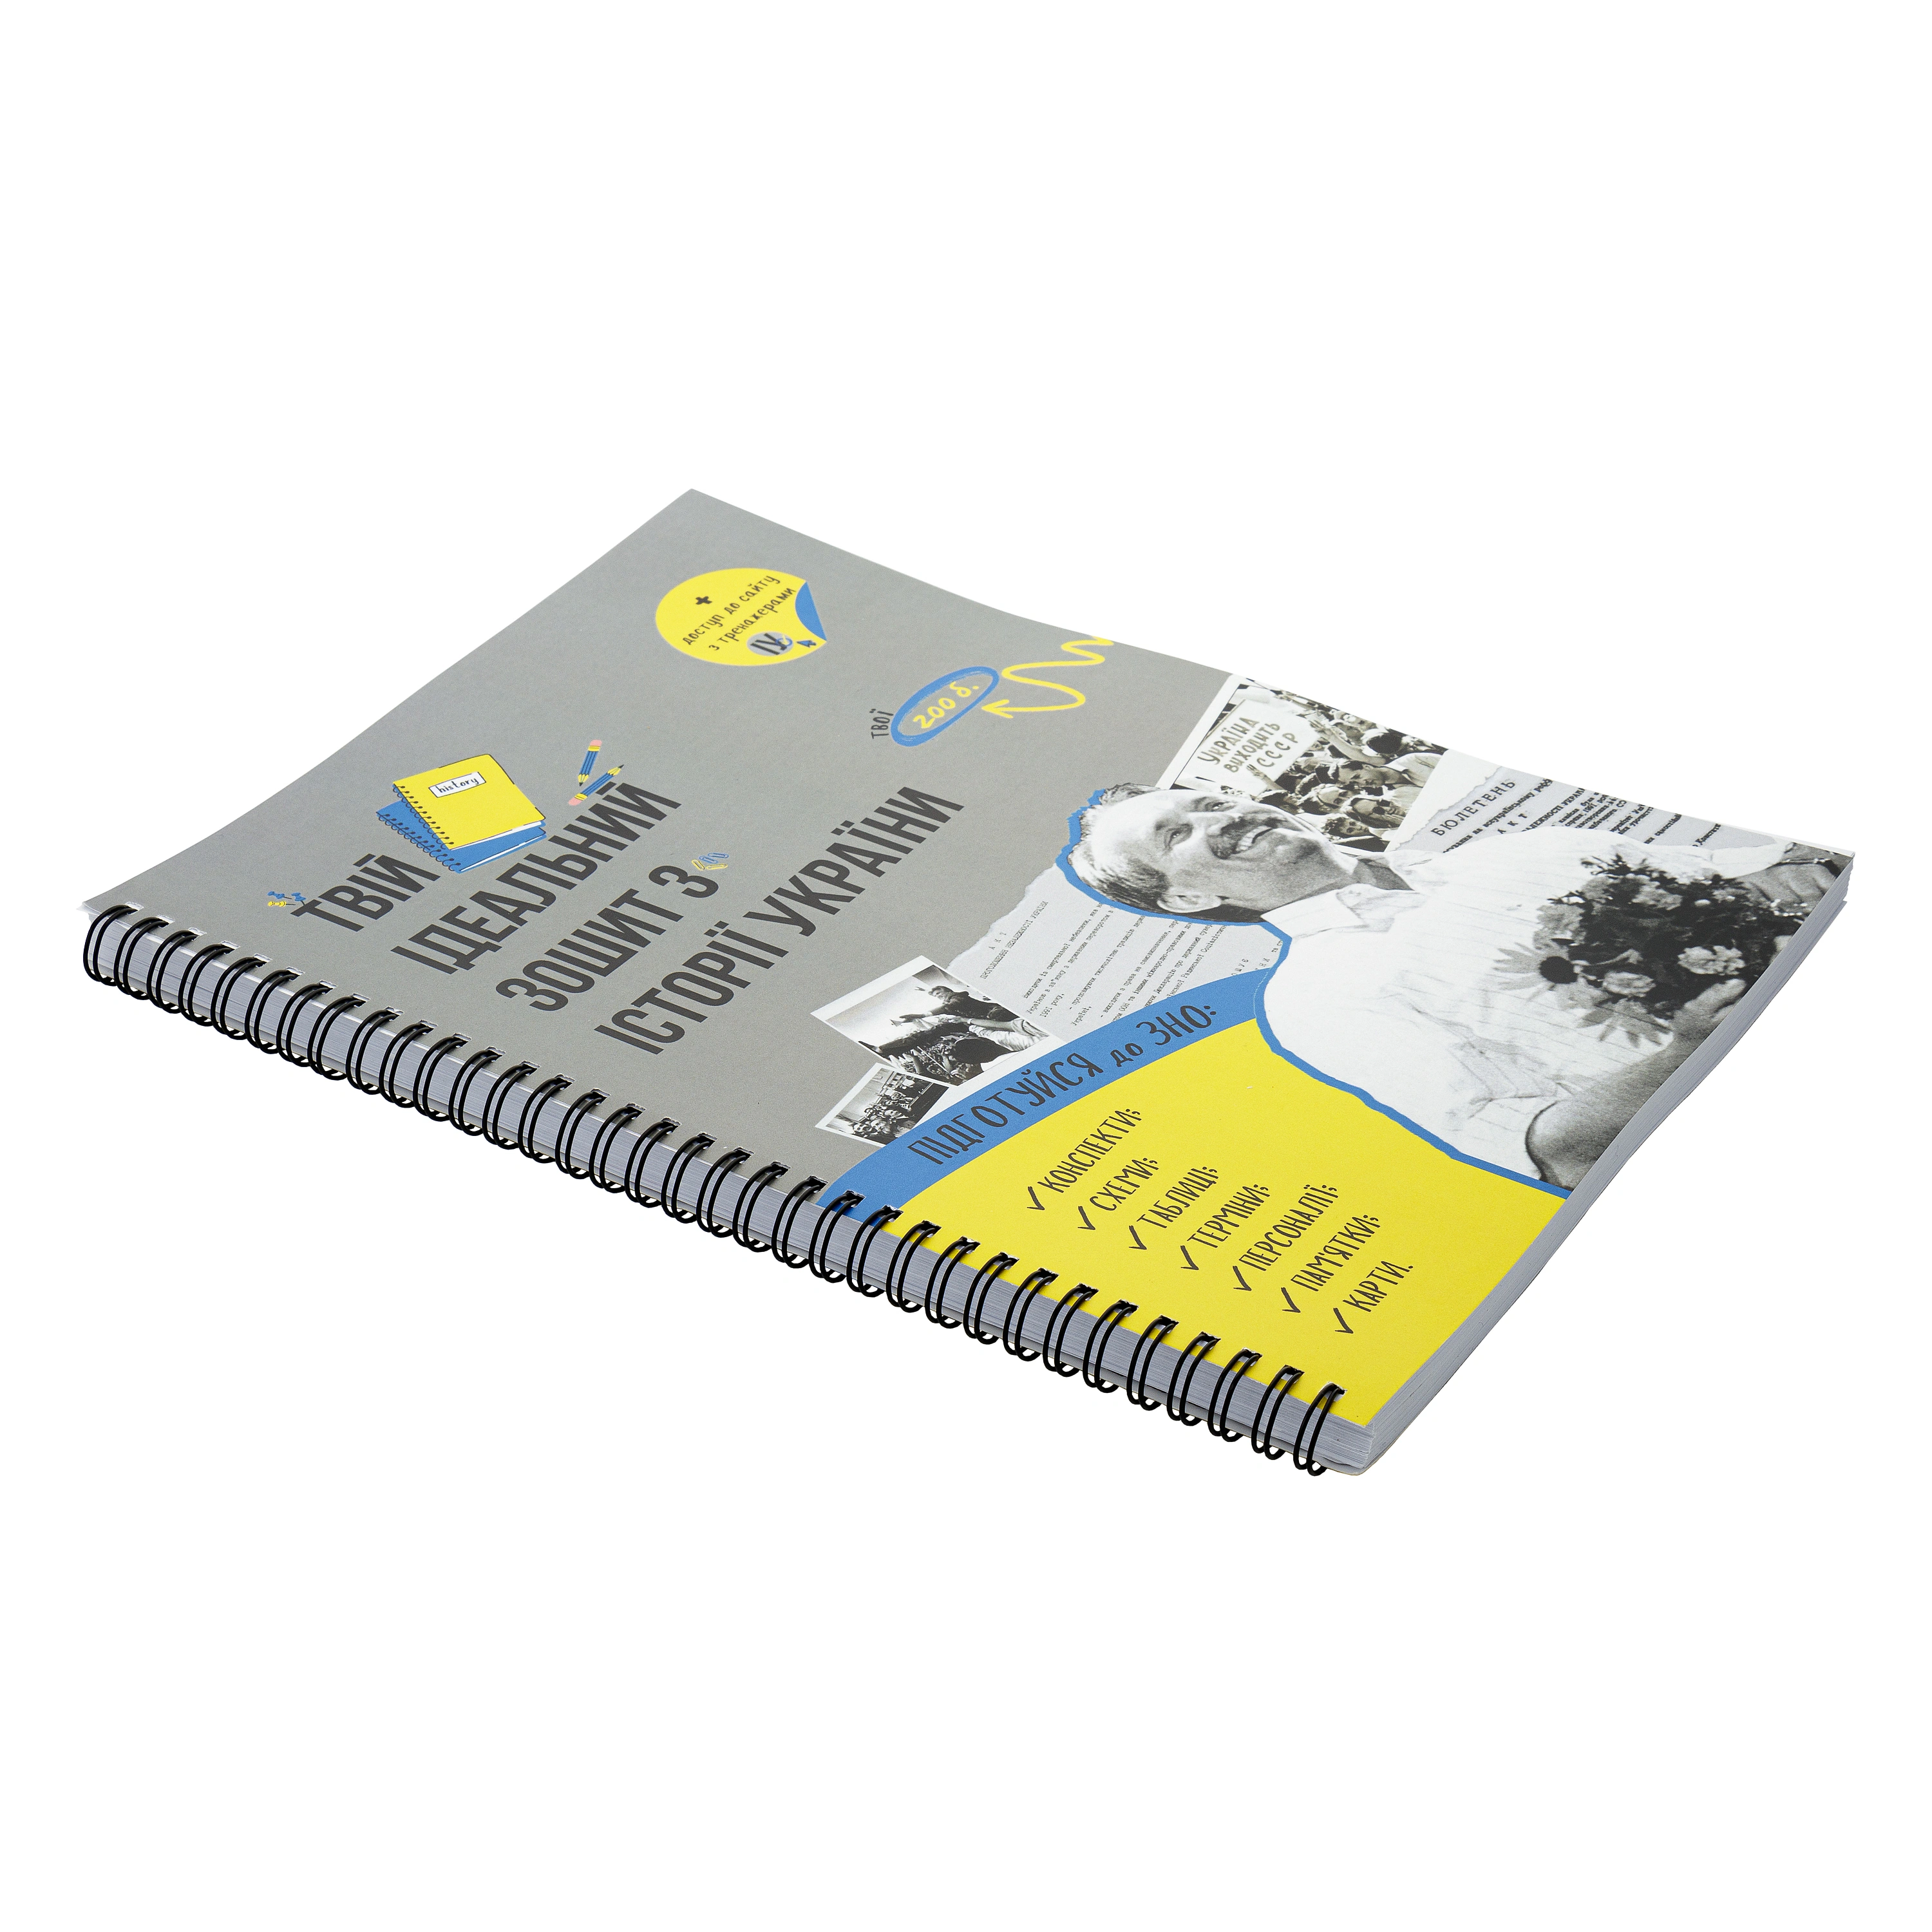 Notebooks on a spring - Printto: